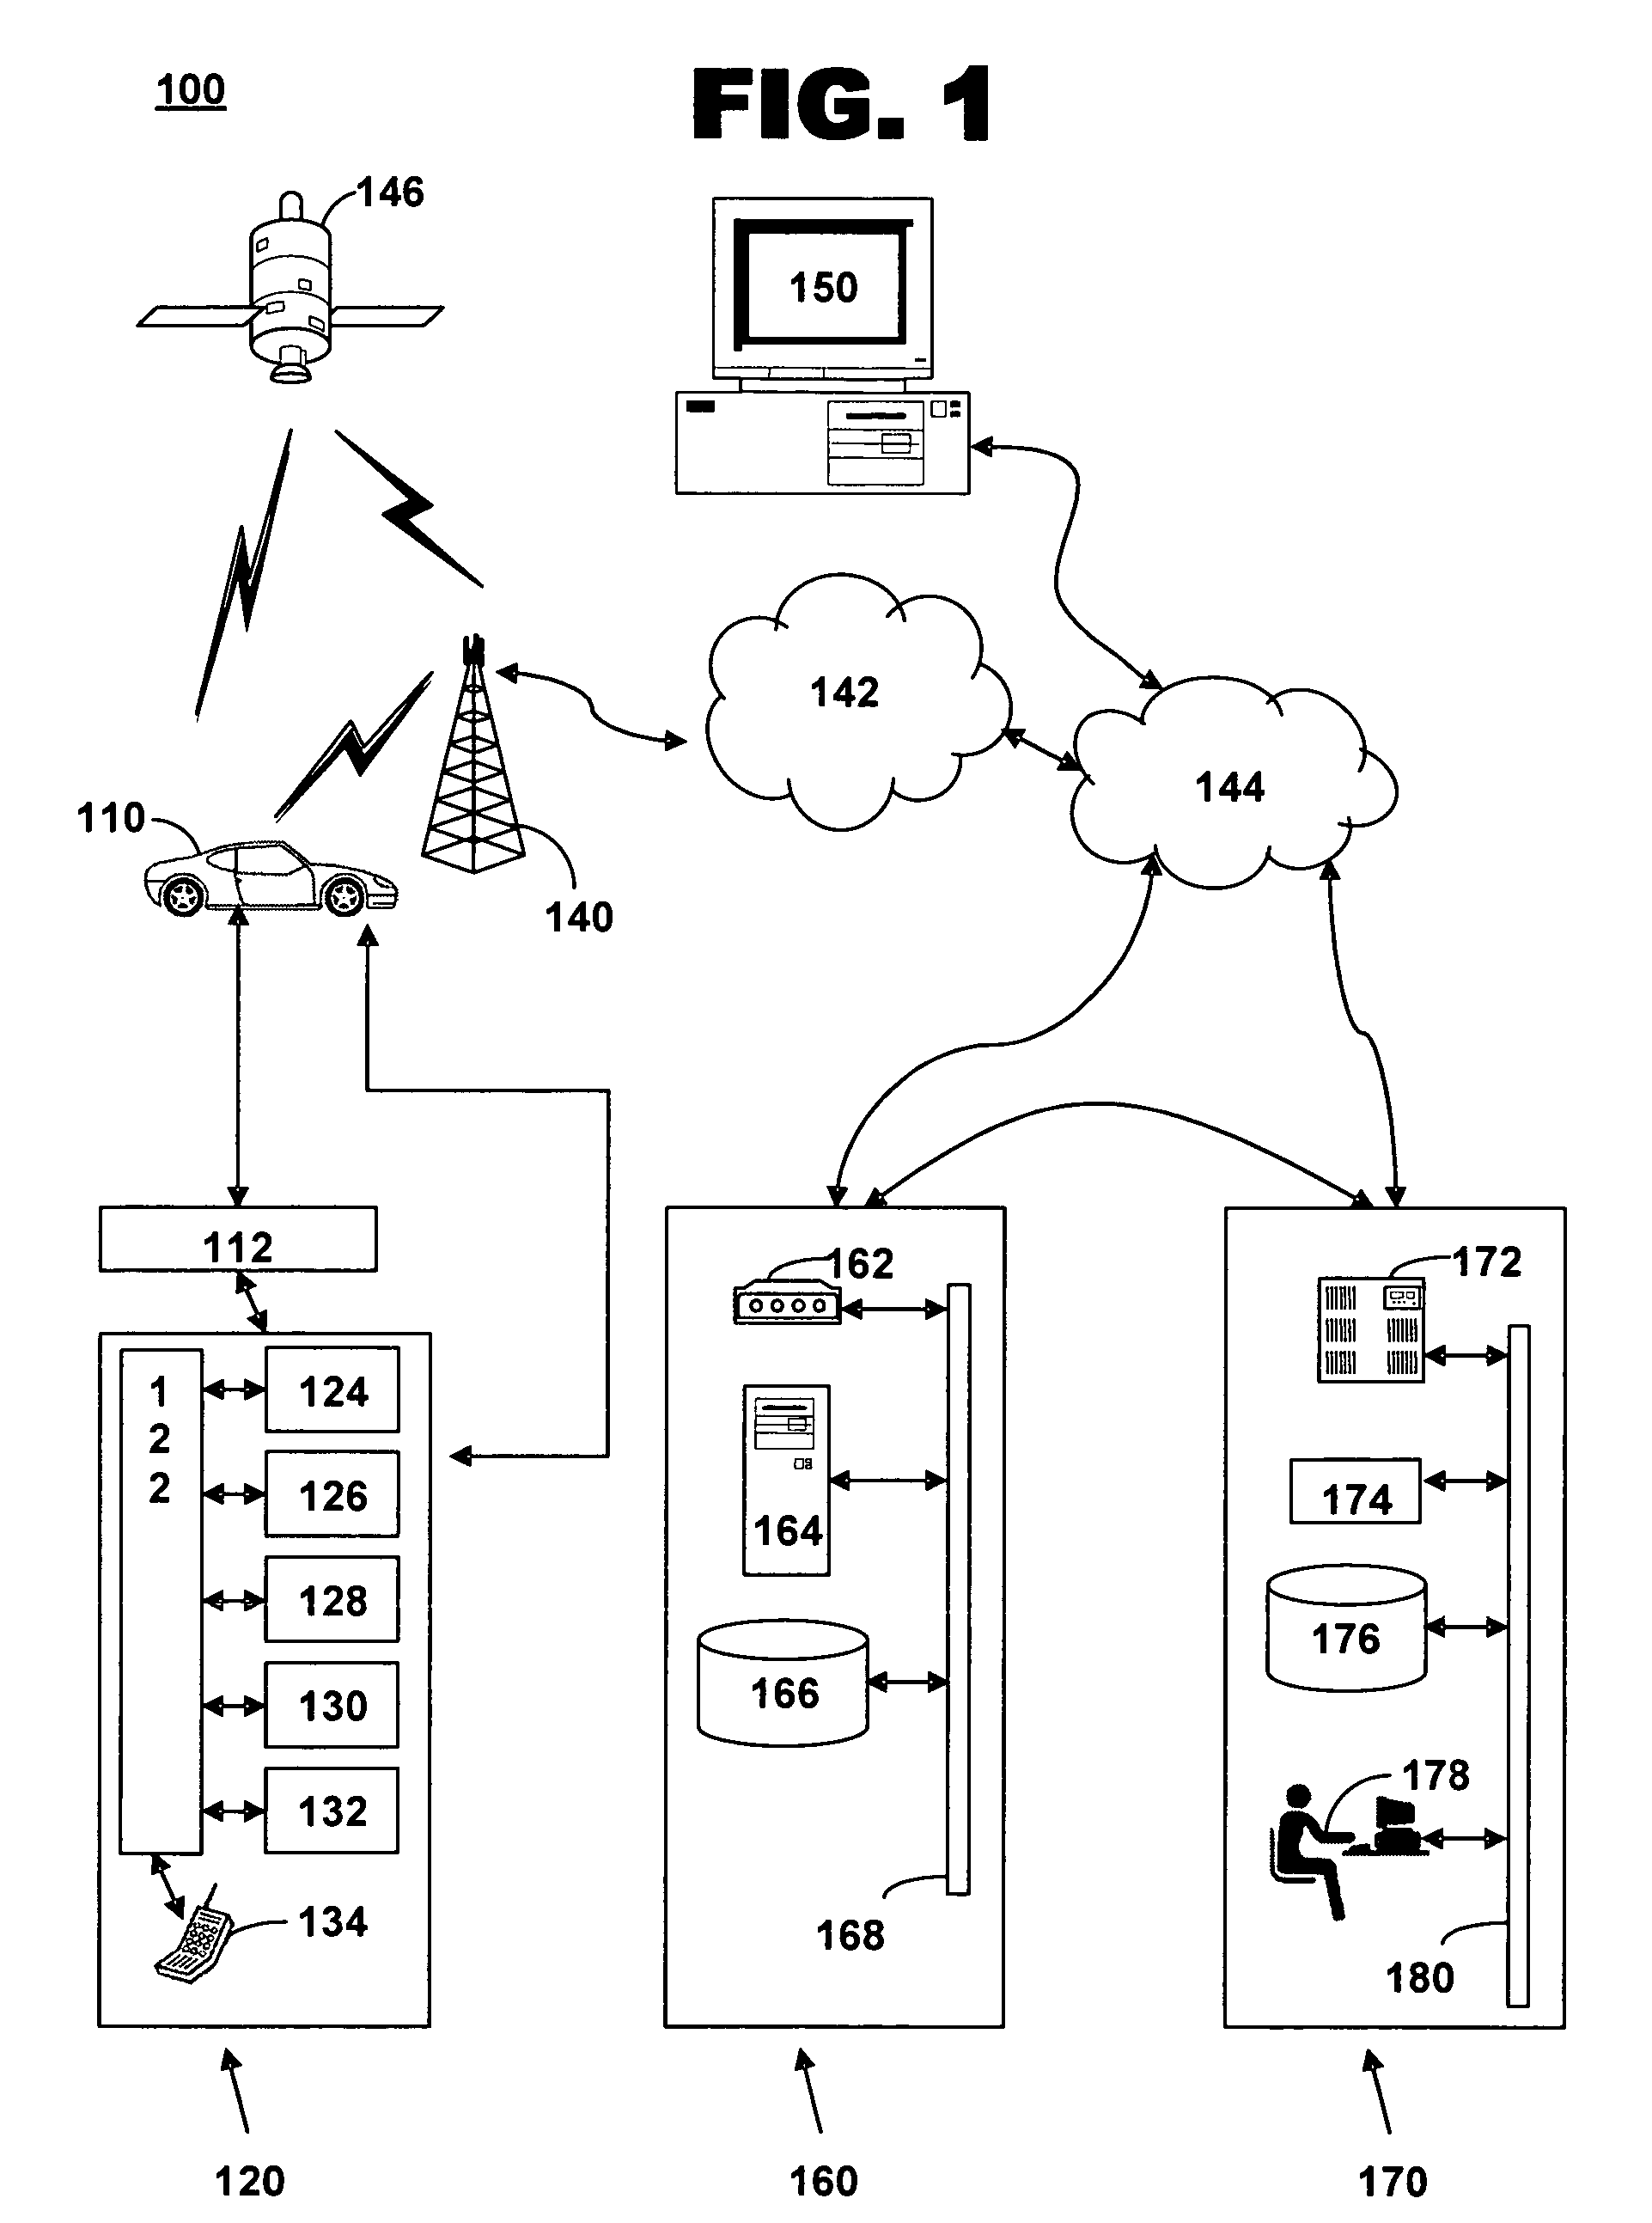 System and method for data correlation within a telematics communication system